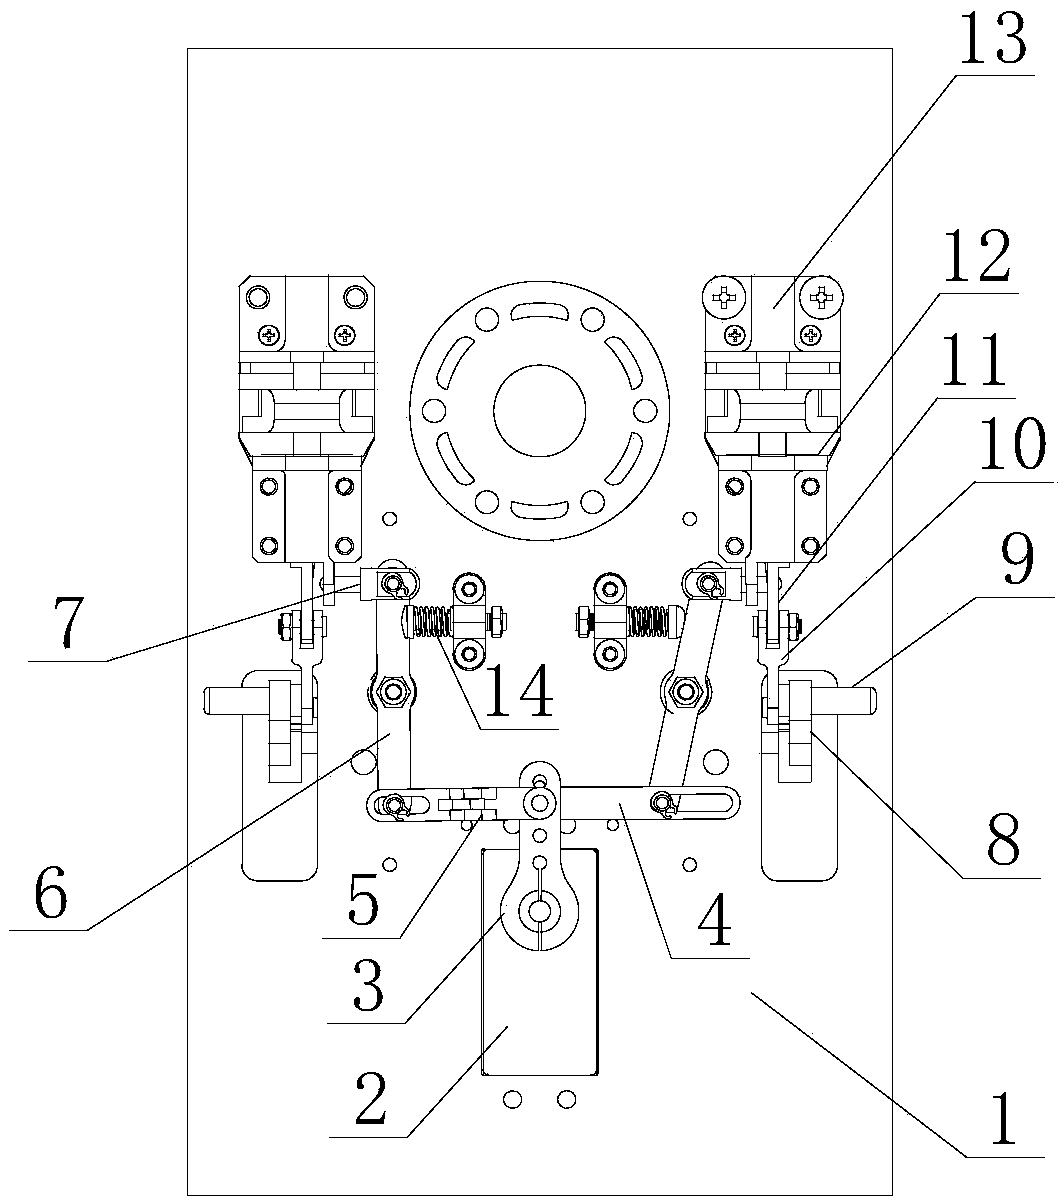 Double unhooking device with self-locking function